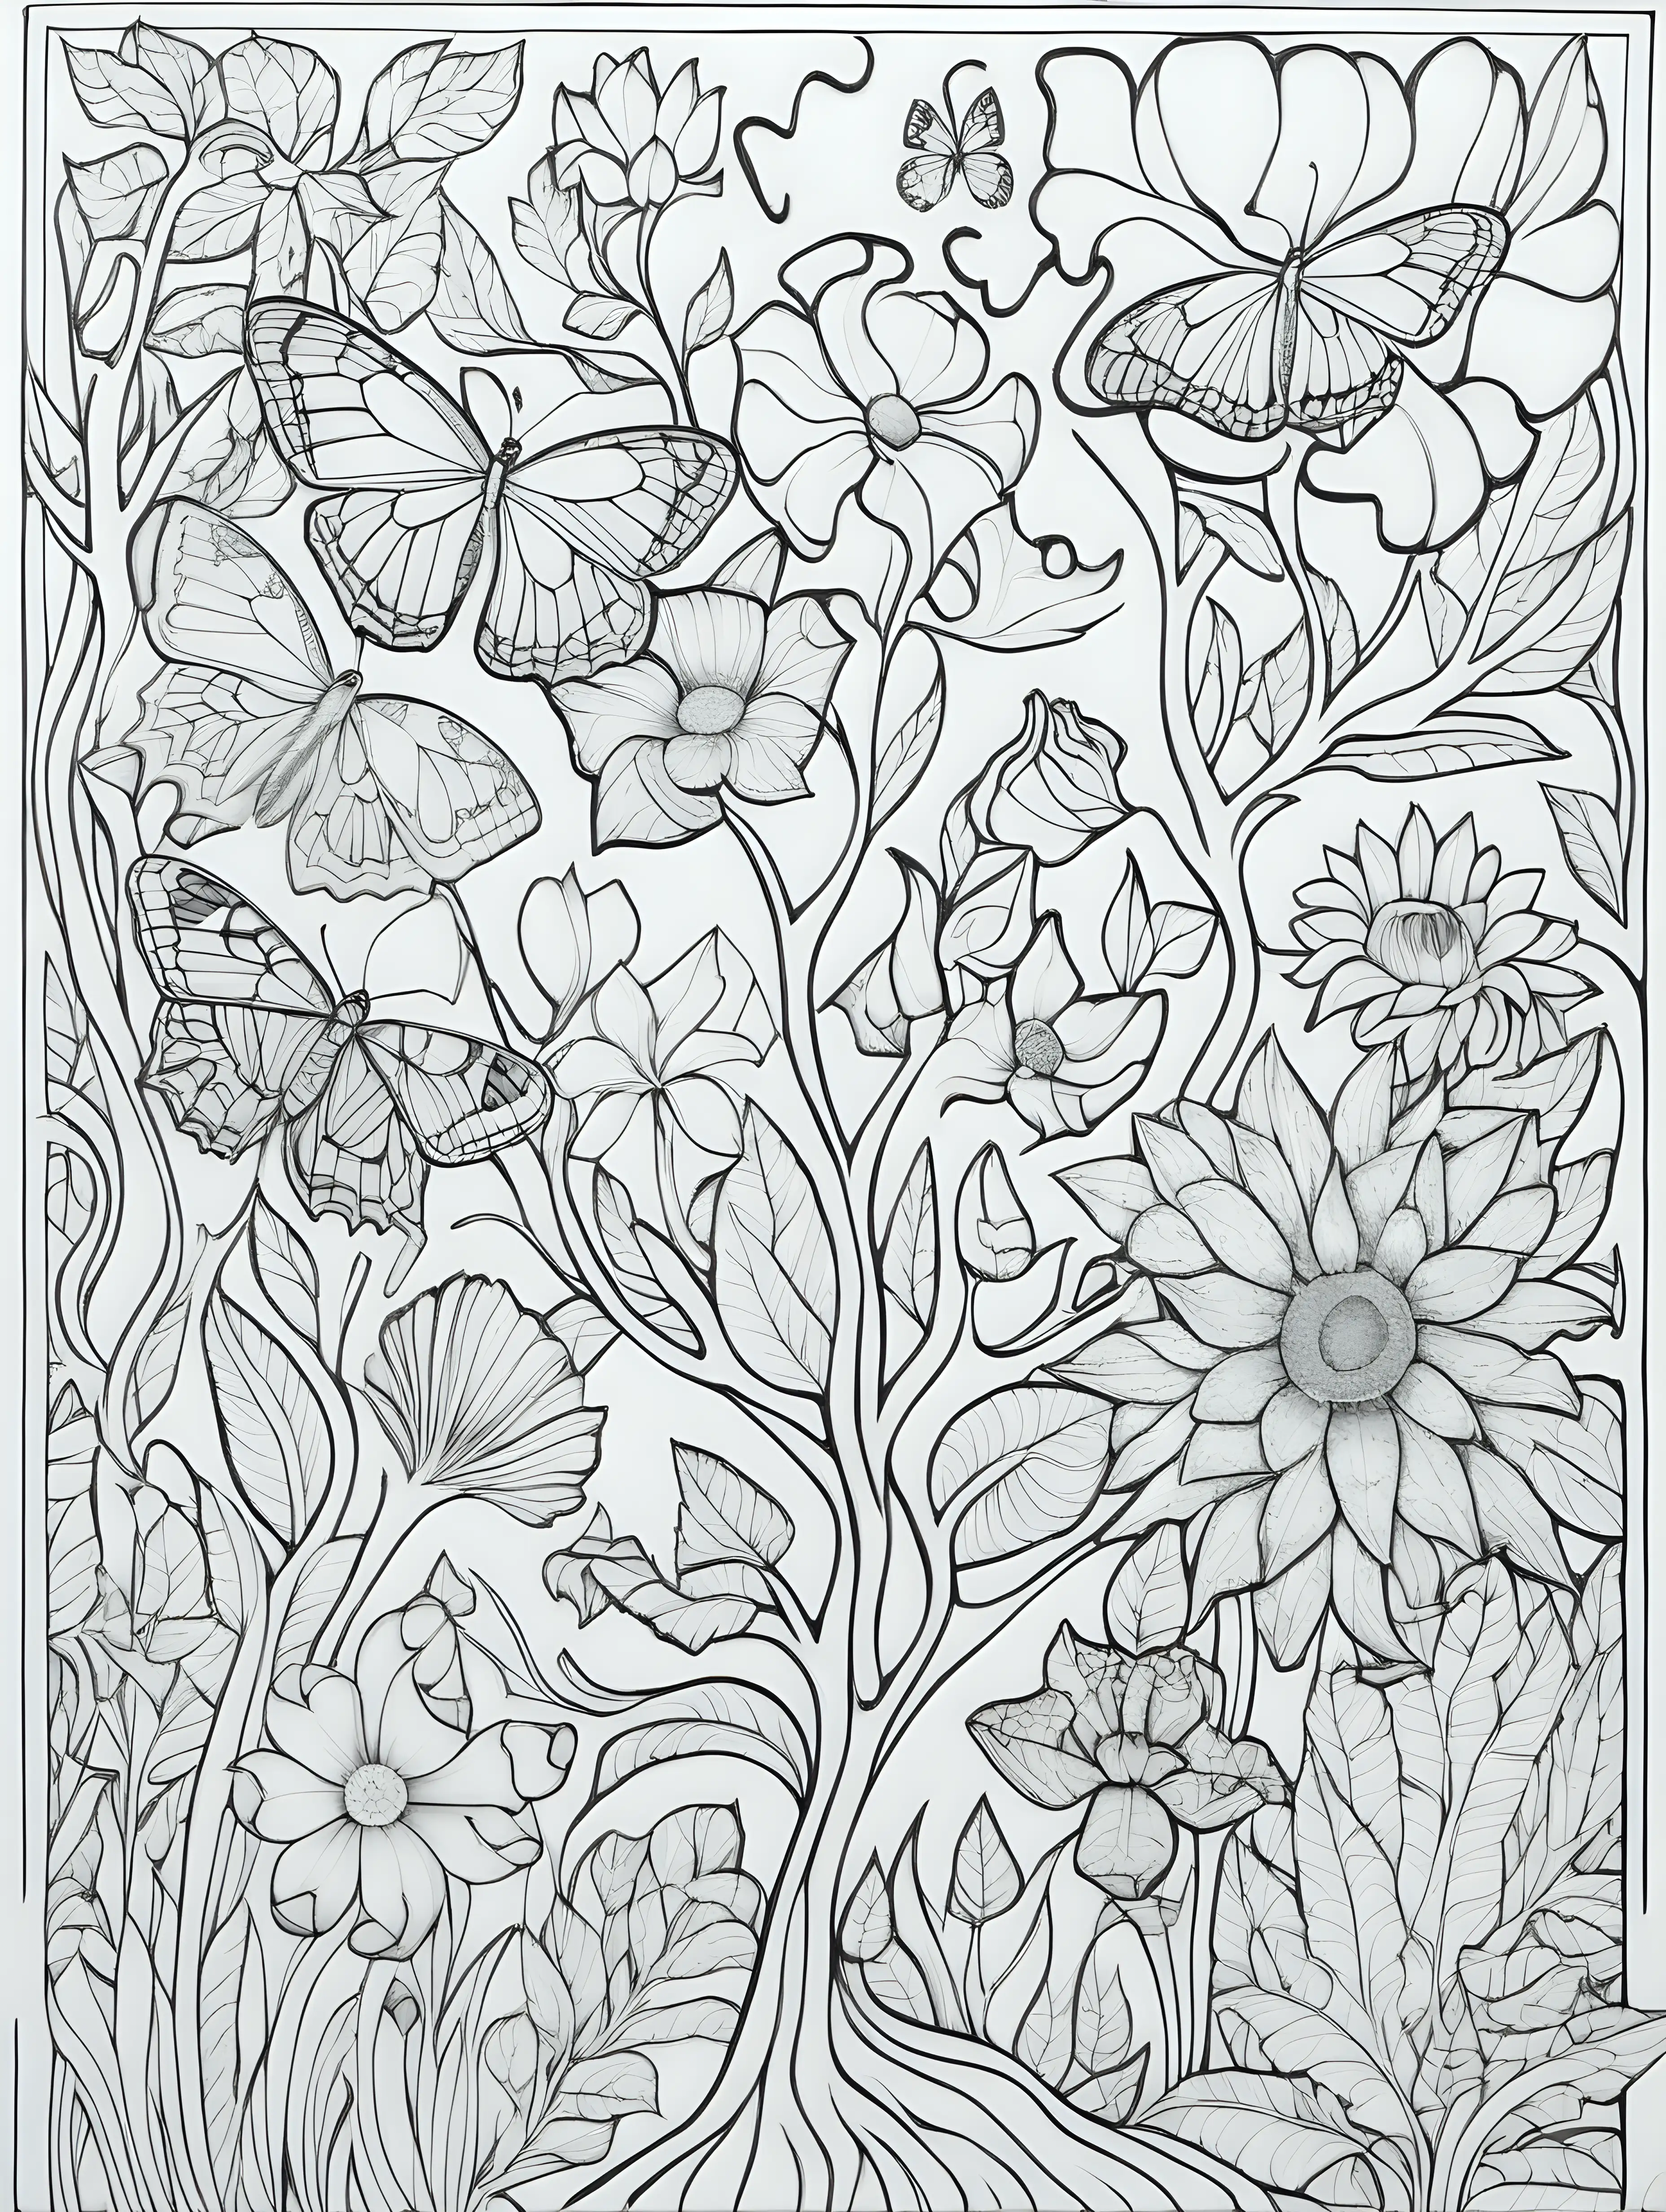 Intricate Adult Coloring Book Harmonious Puzzle Pieces with Life Themes